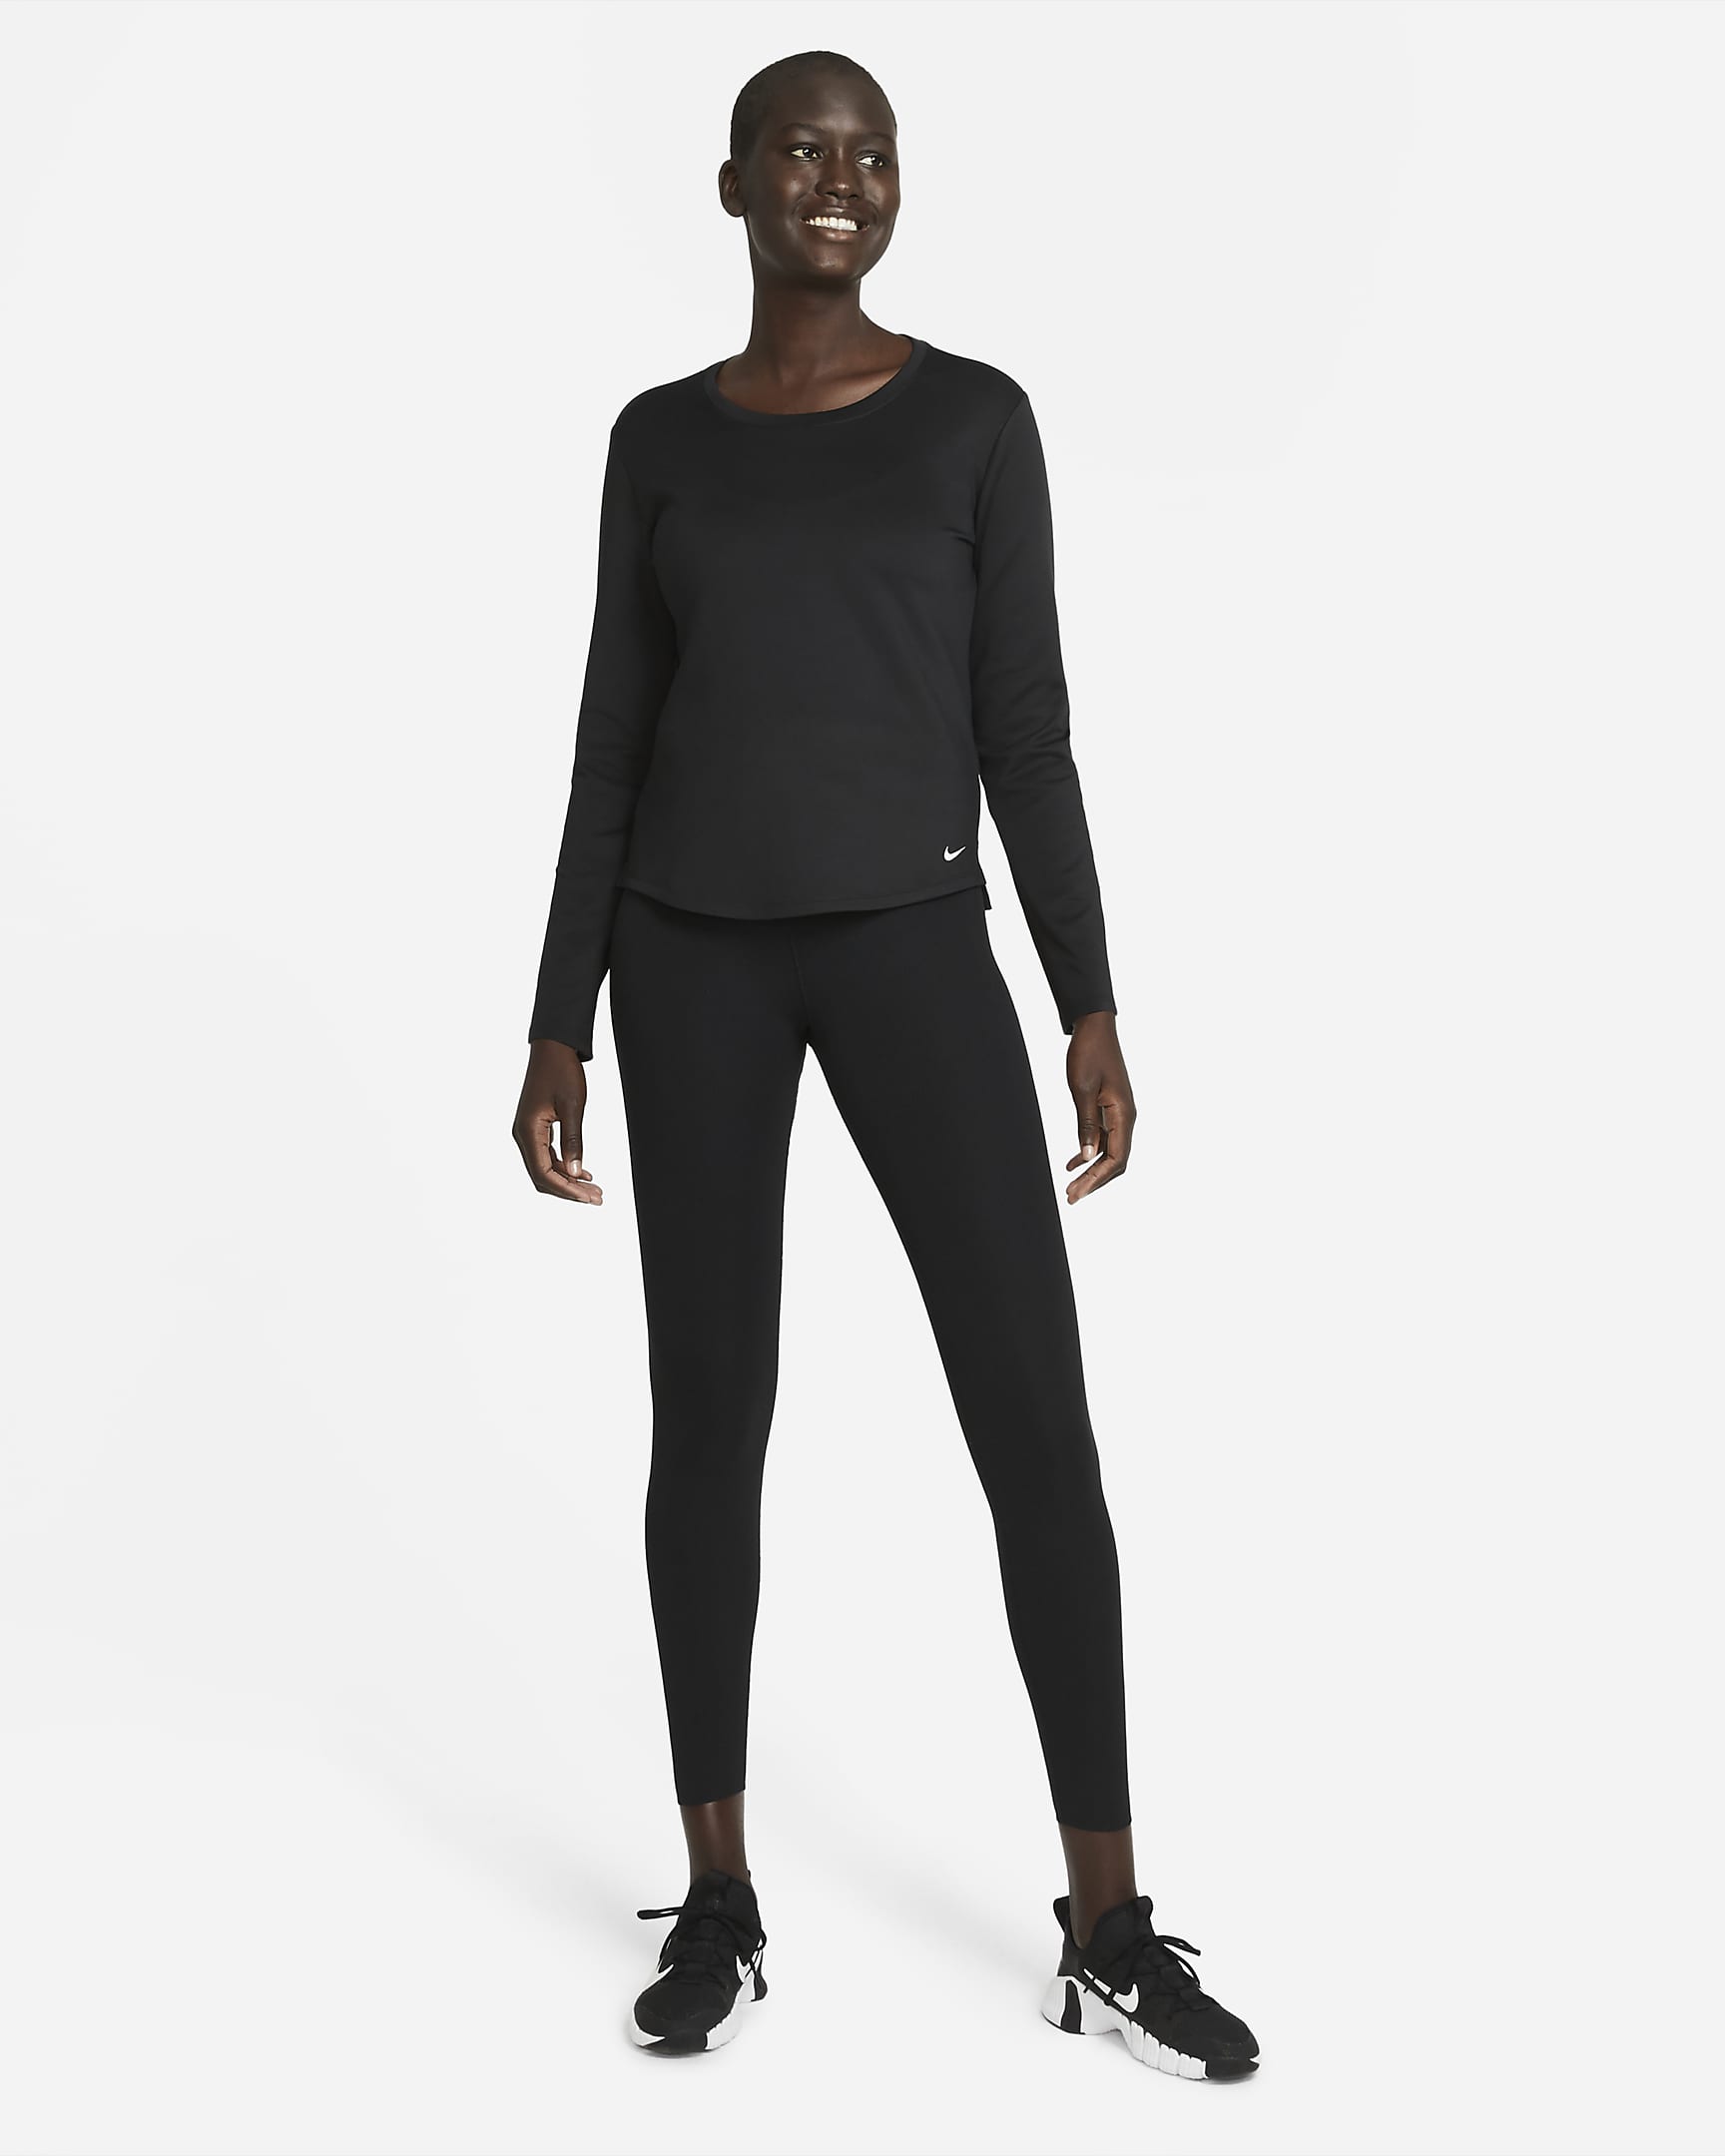 Nike Therma-FIT One Women's Long-Sleeve Top. Nike HR